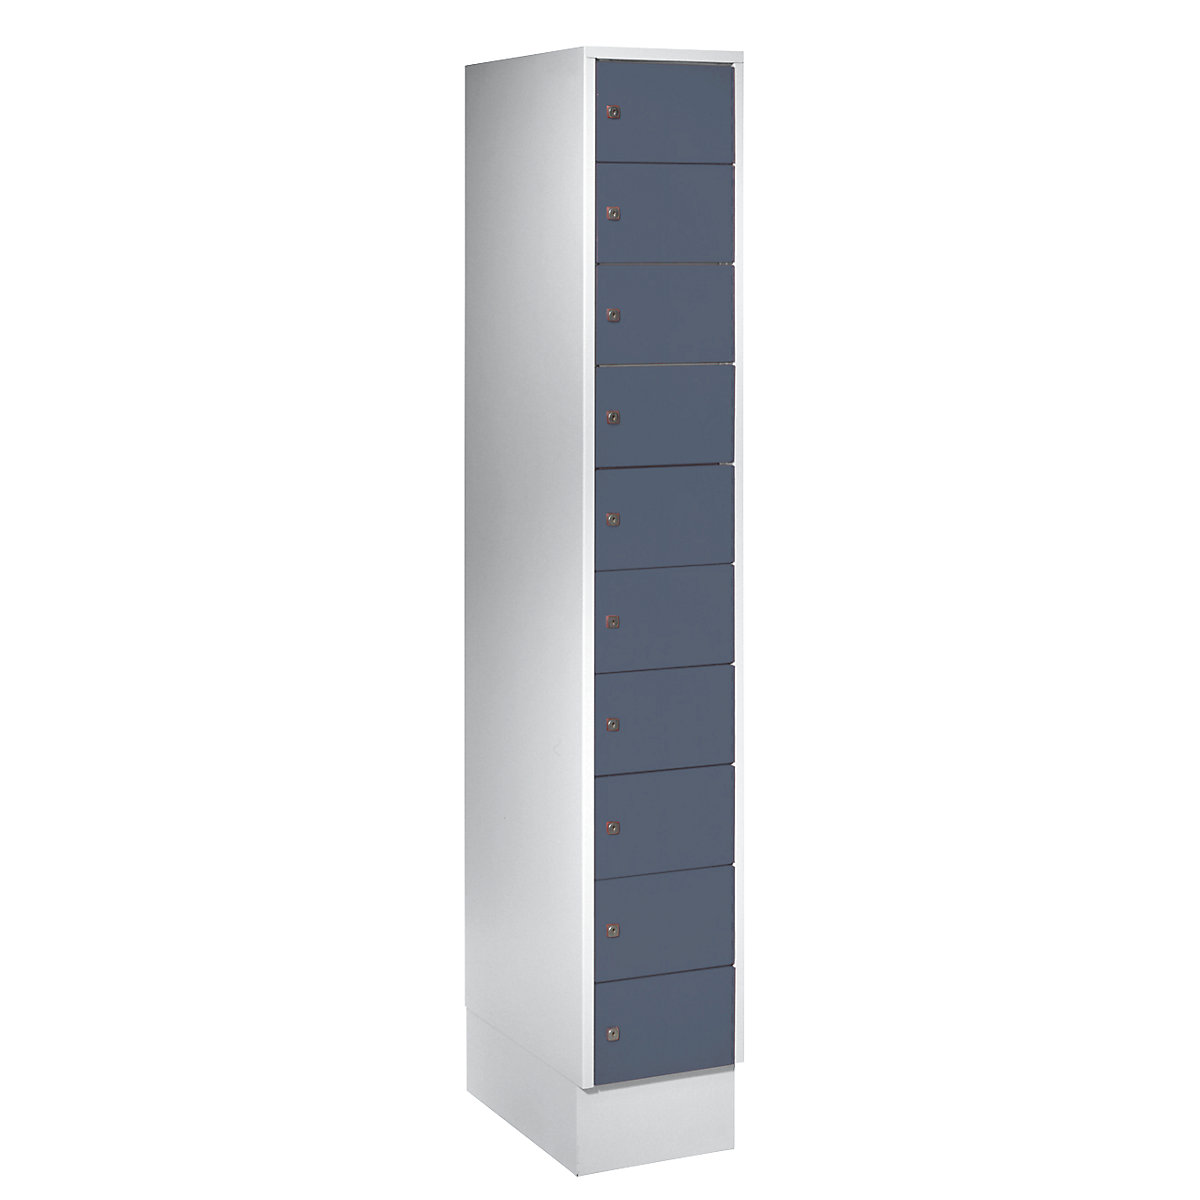 Small locker cupboard – Wolf, 10 compartments, HxW 1850 x 300 mm, door colour blue grey RAL 7031